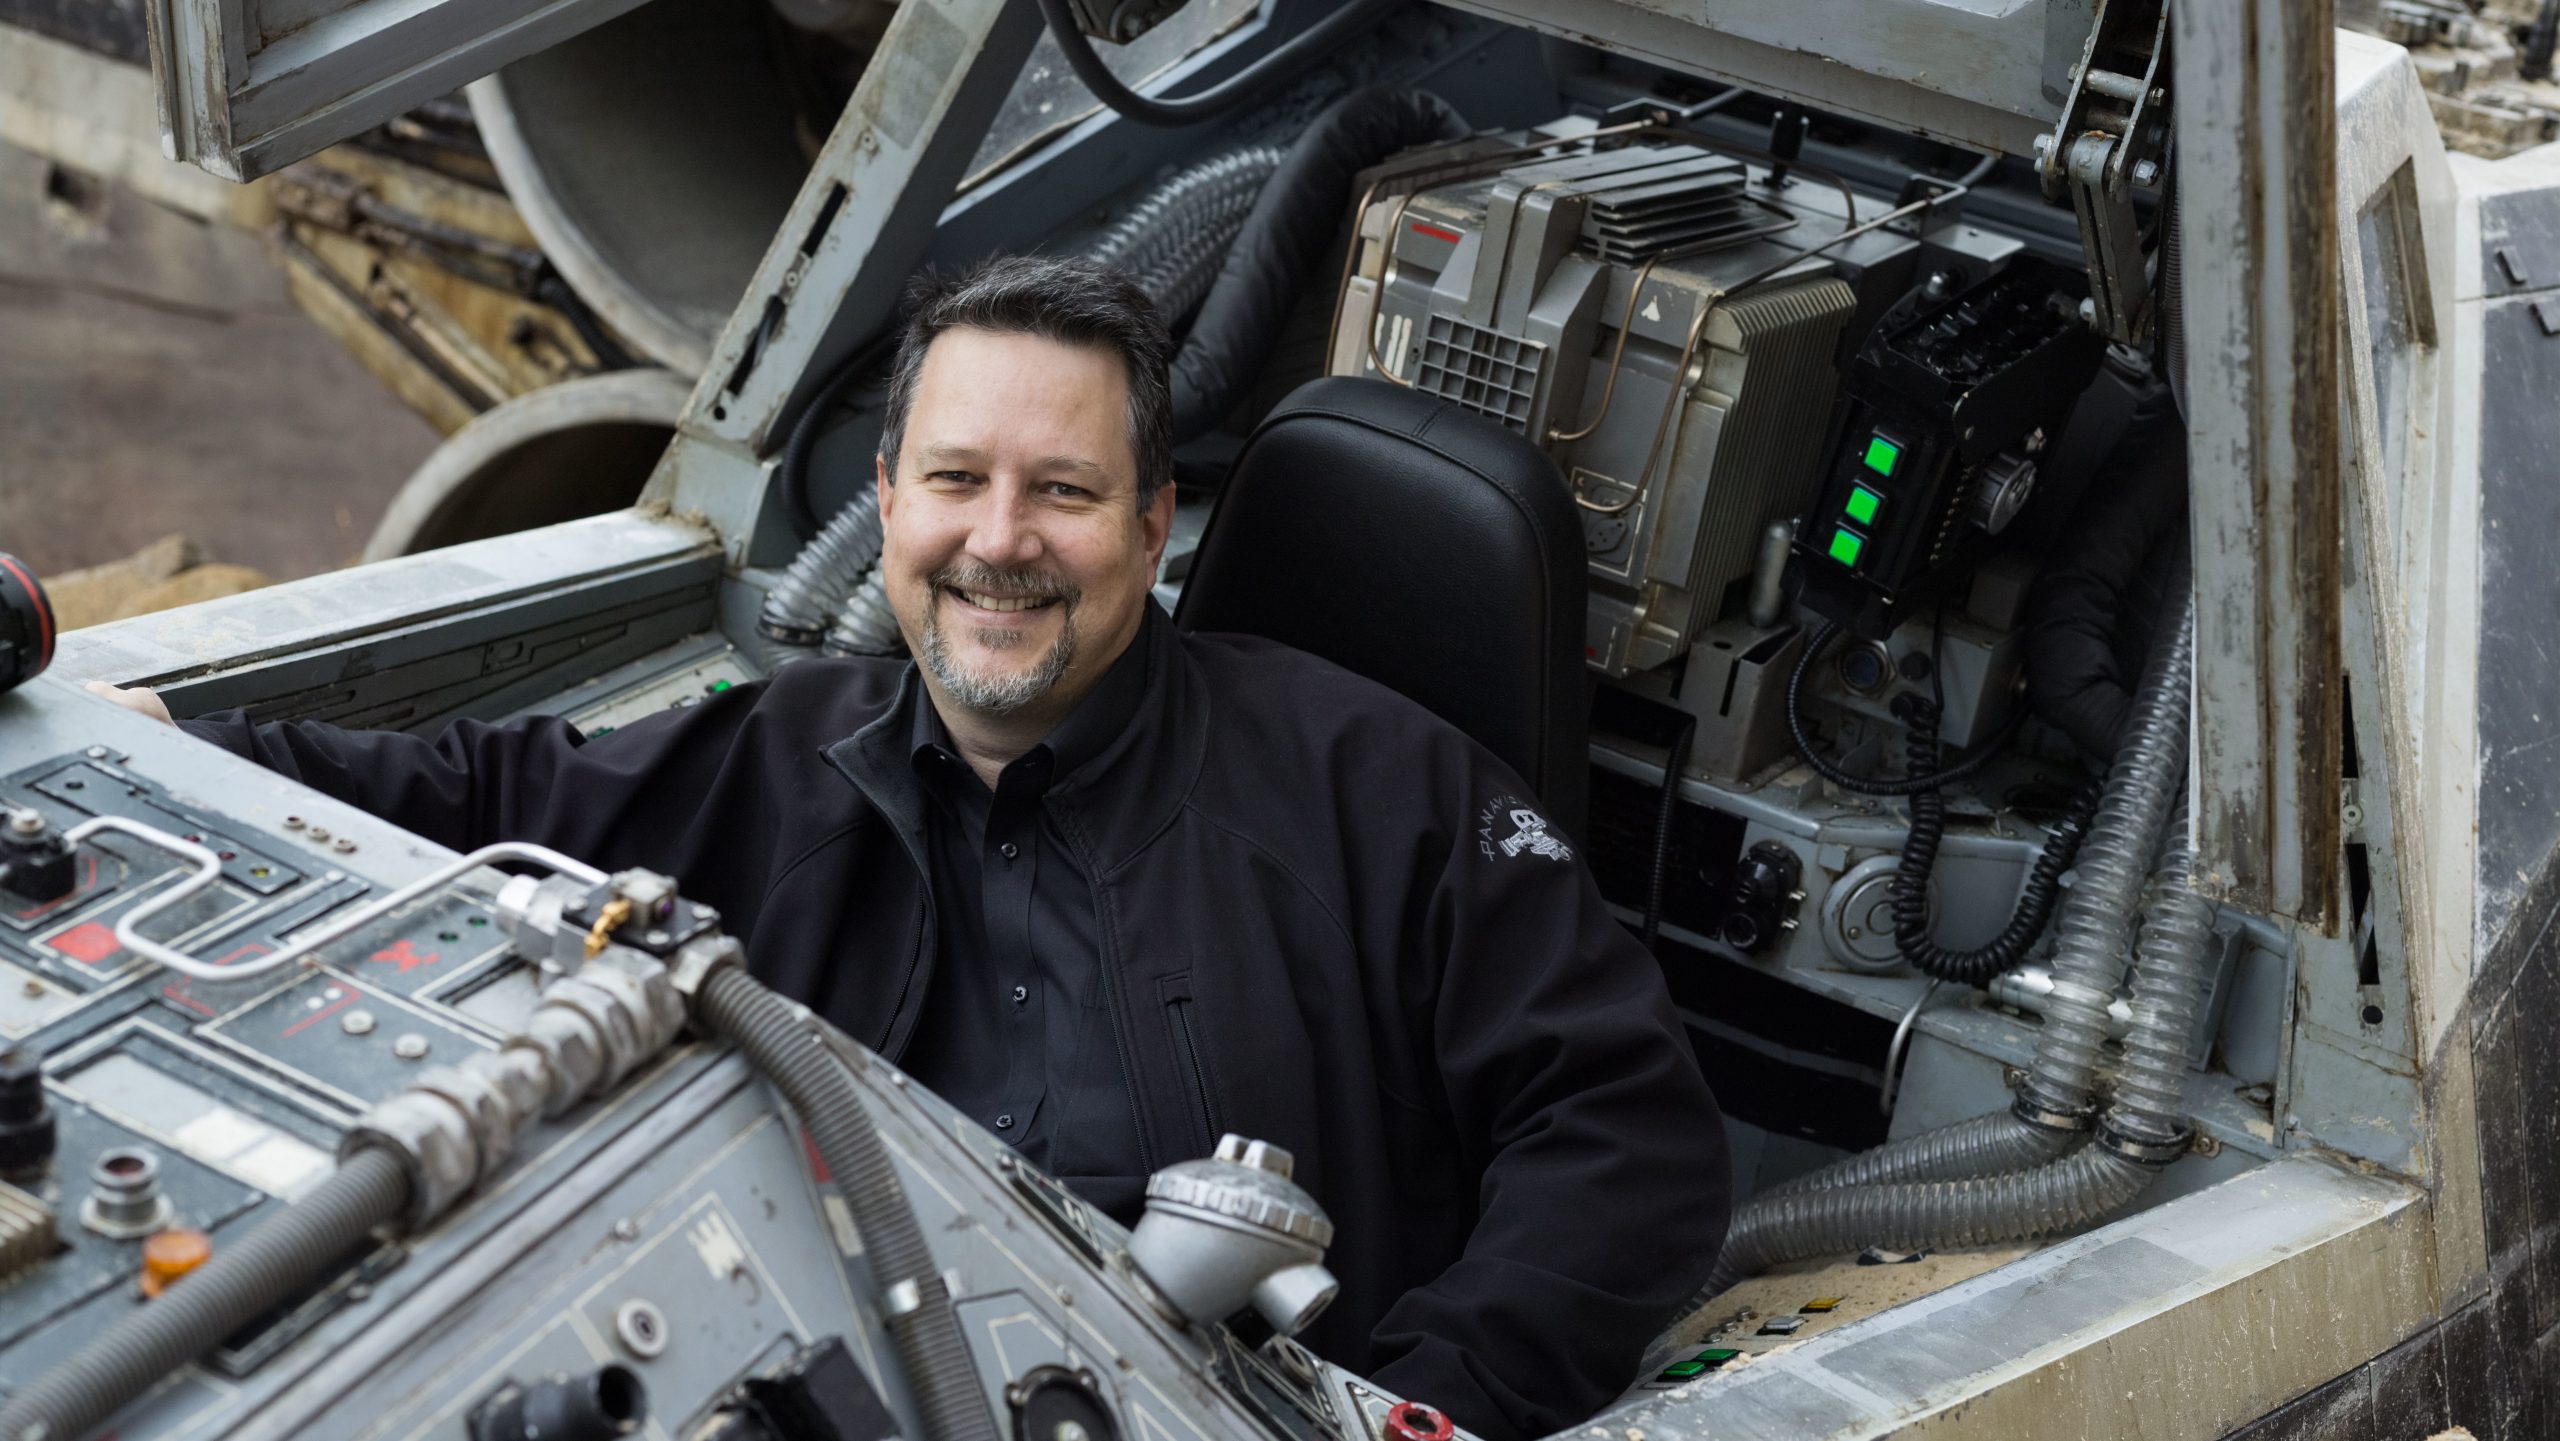 John Knoll discusses technology and innovation on Rogue One: A Star Wars Story